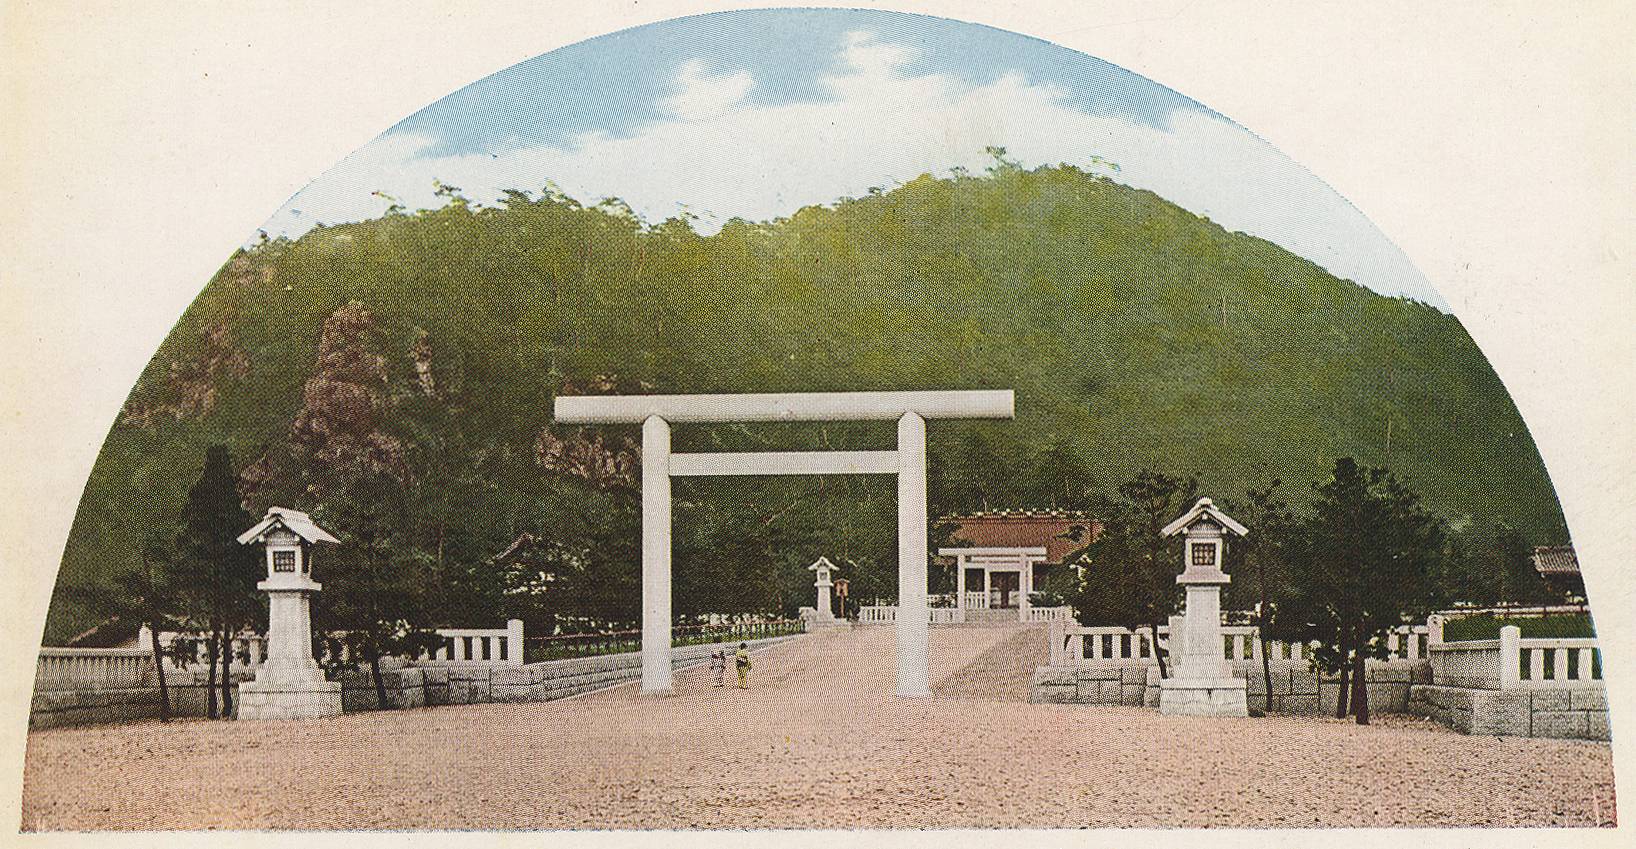 "The Shinto shrine that protects Korea." From a series of postcards dedicated to famous spots in Keijō (as Seoul was known during Japanese colonial rule during the first half of the twentieth century).